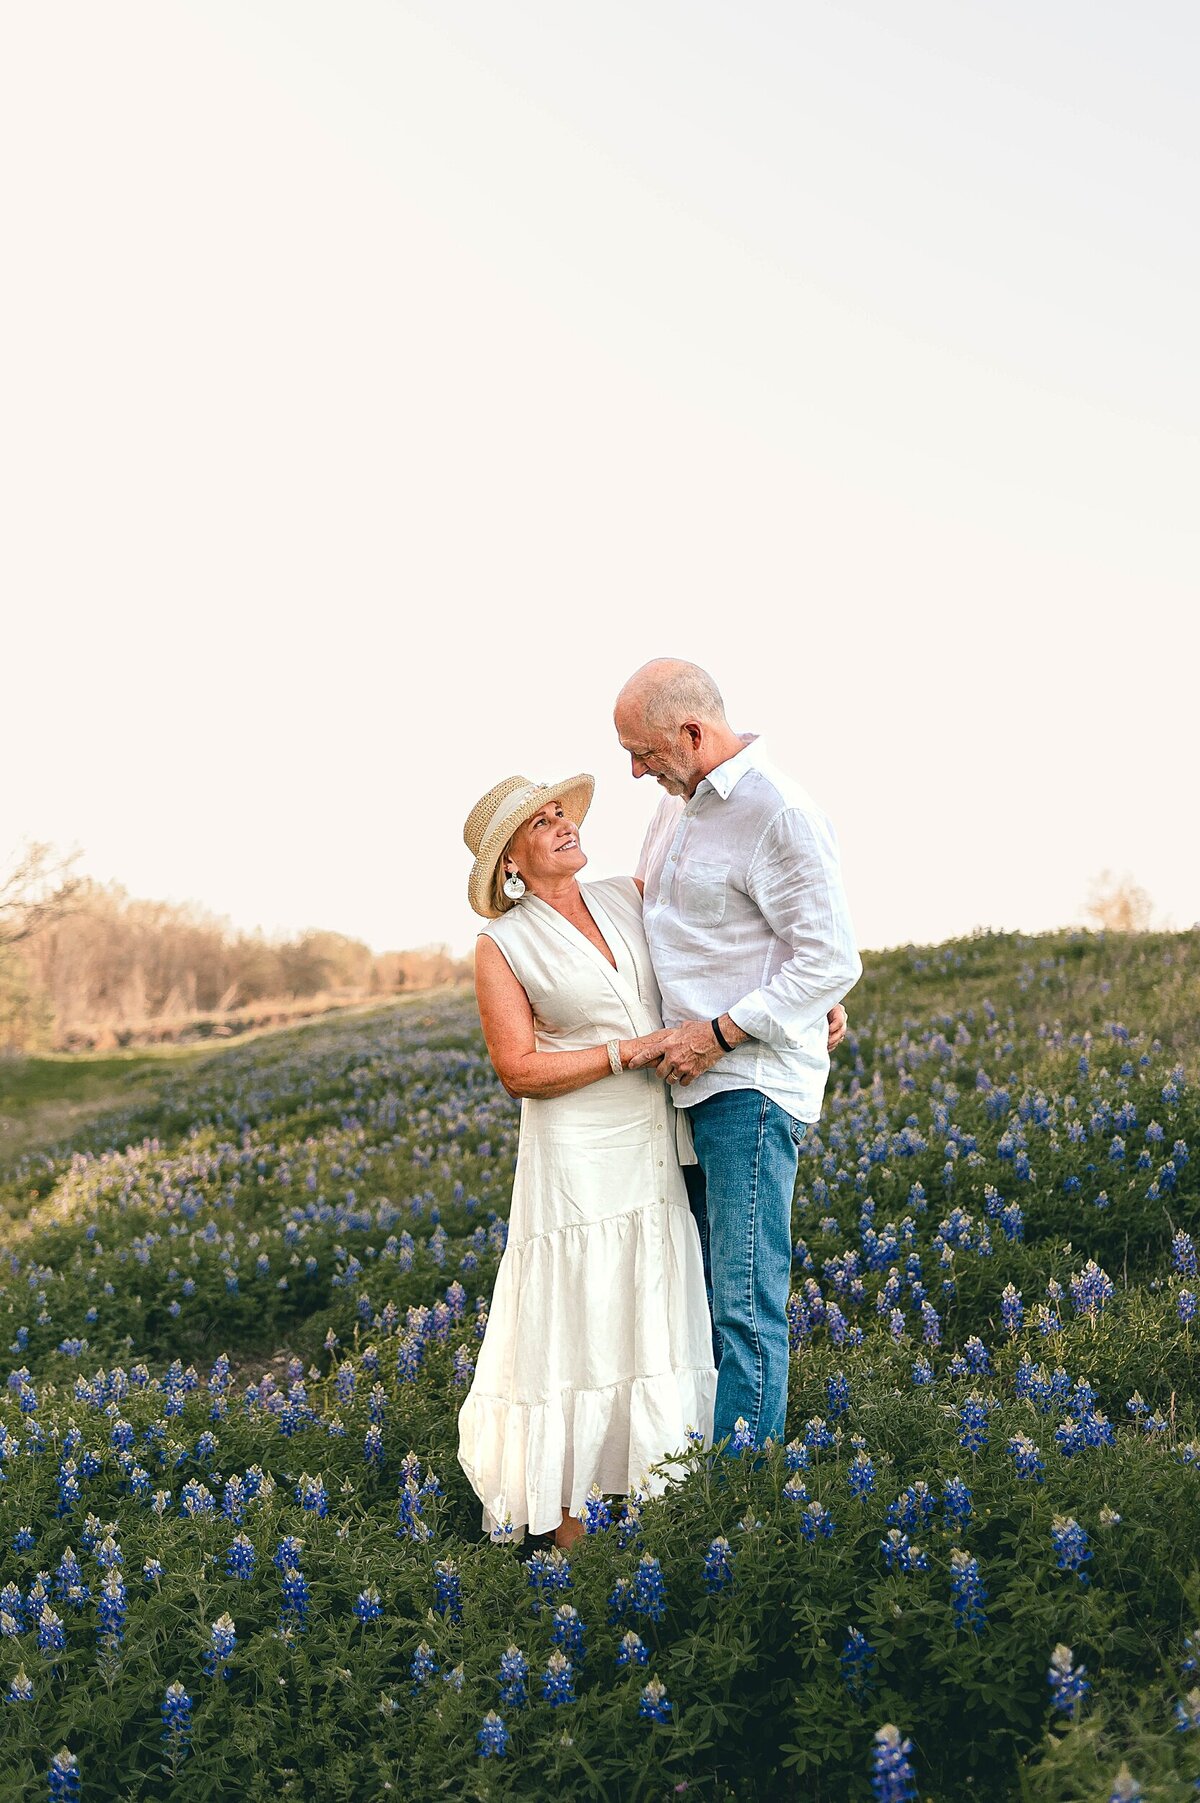 Older couple standing in bluebonnets holding hands and looking at each other smiling by Cypress Family Photographer